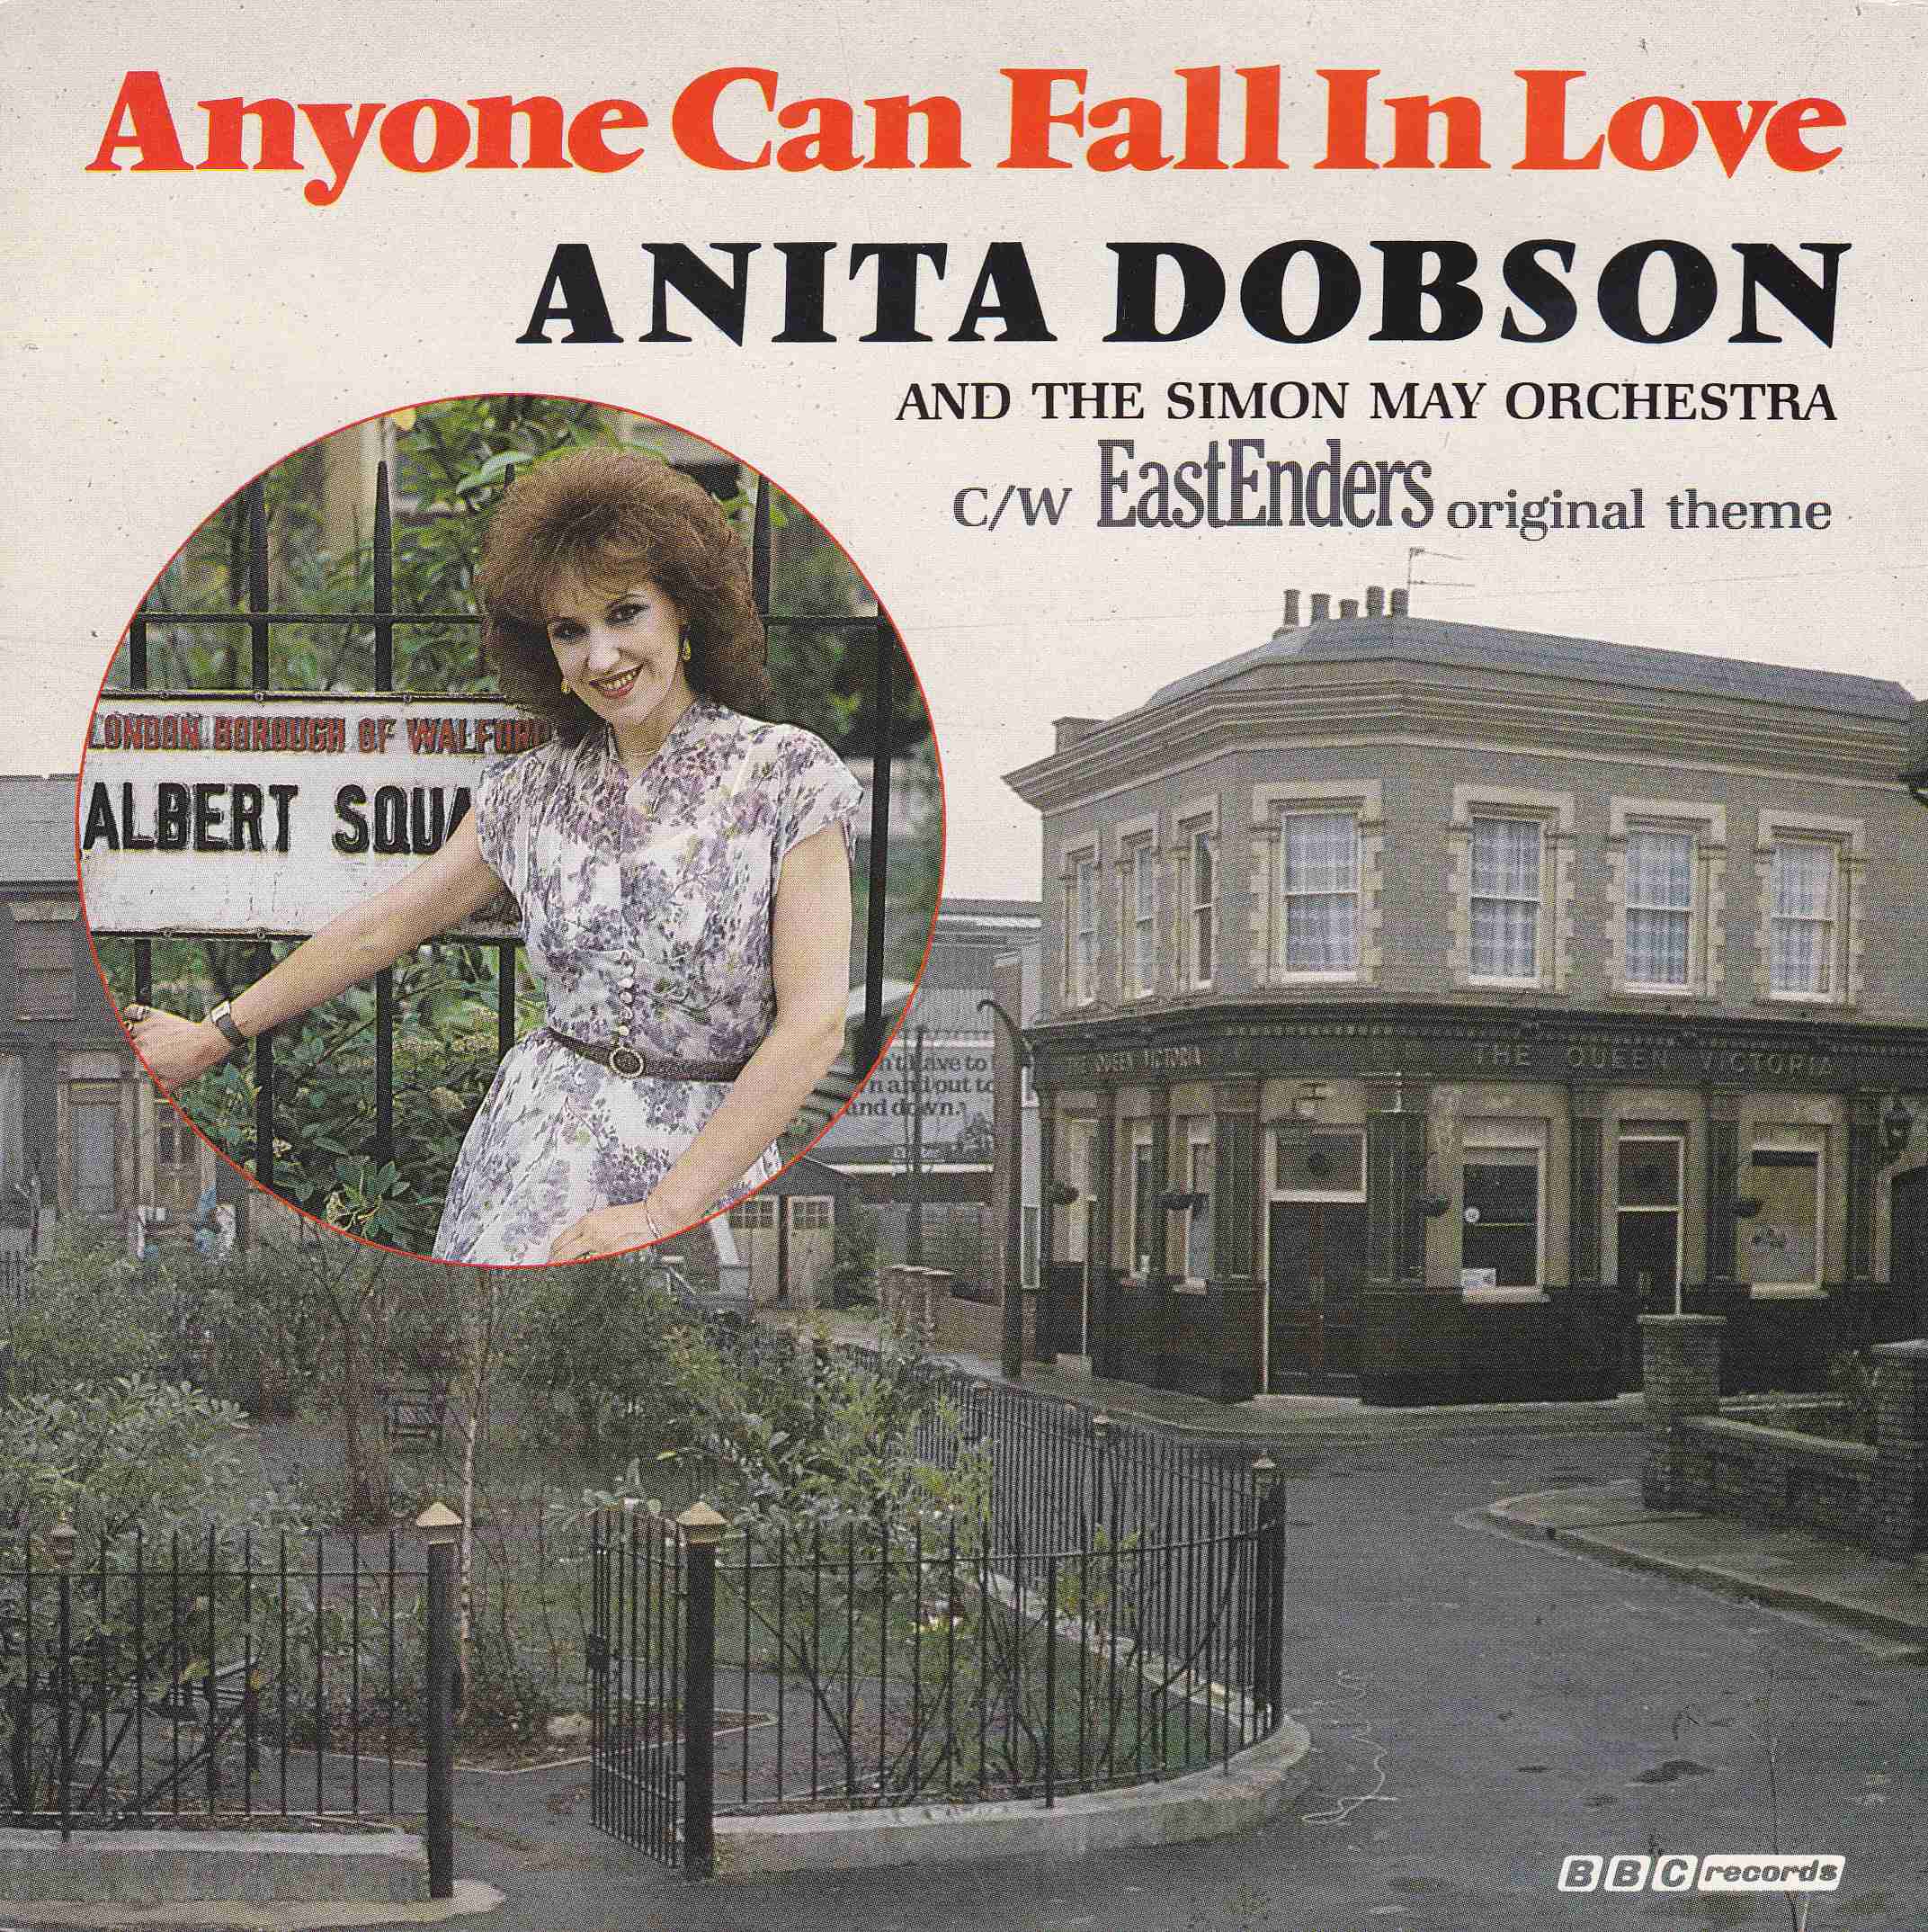 Picture of RESL 191 Anyone can fall in love (EastEnders) by artist Anita Dobson with the Simon May Orchestra from the BBC records and Tapes library